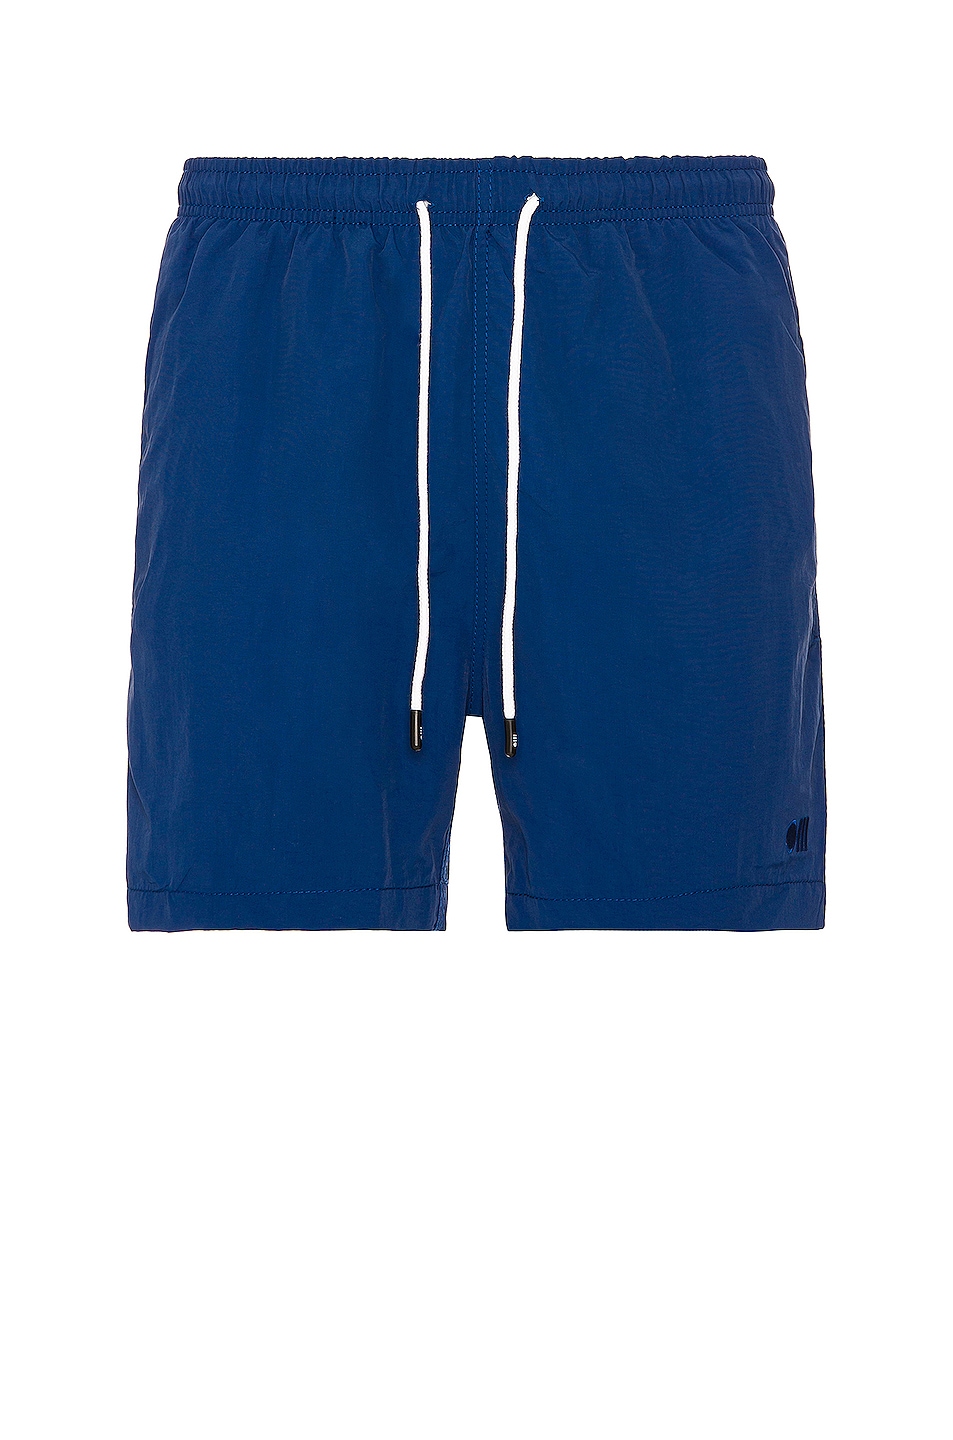 Image 1 of Solid & Striped The Classic Shorts in Navy